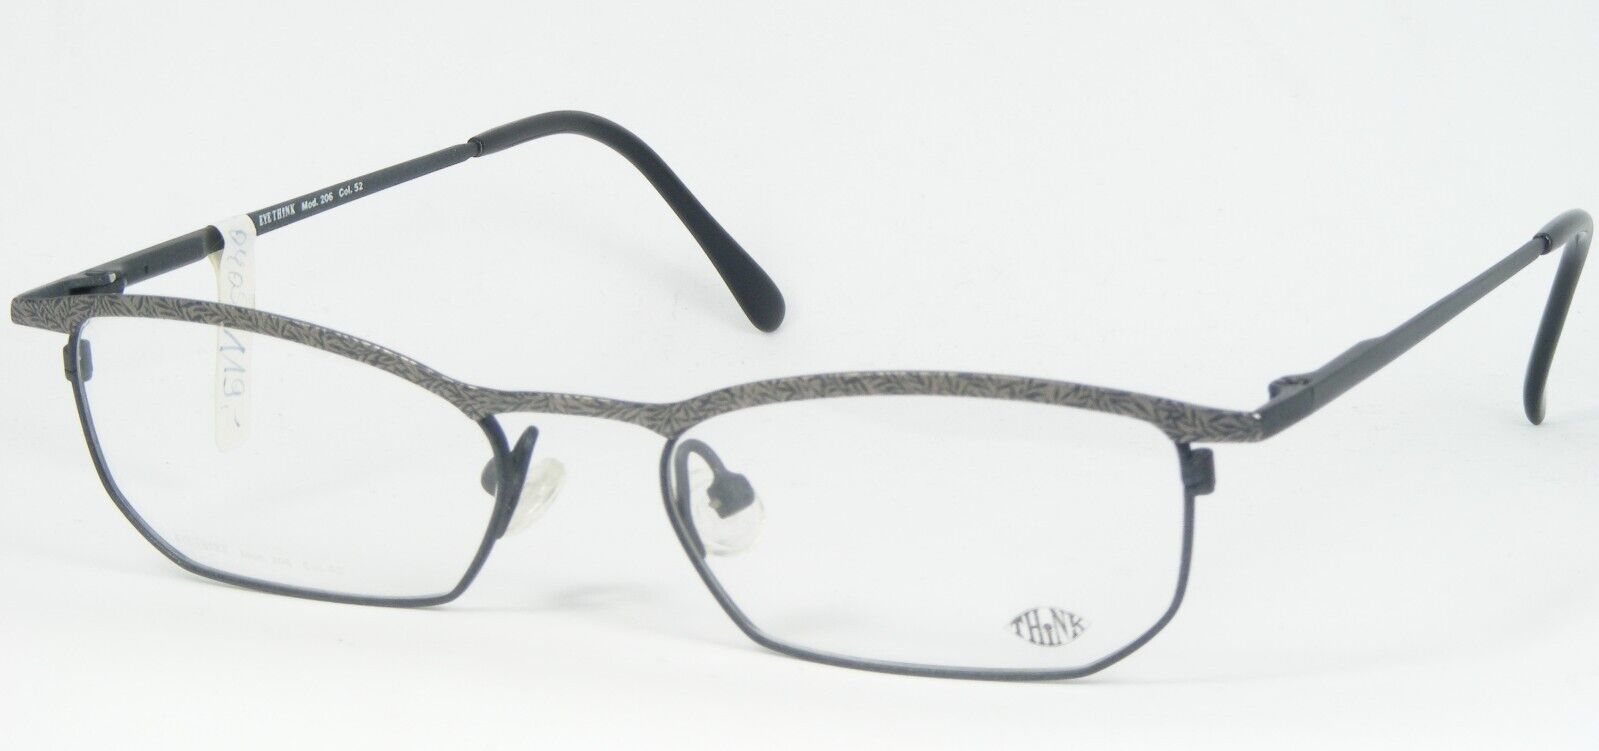 Primary image for Vintage Eye Think 206 52 Étain Gris/Charbon Lunettes 48-16-140mm